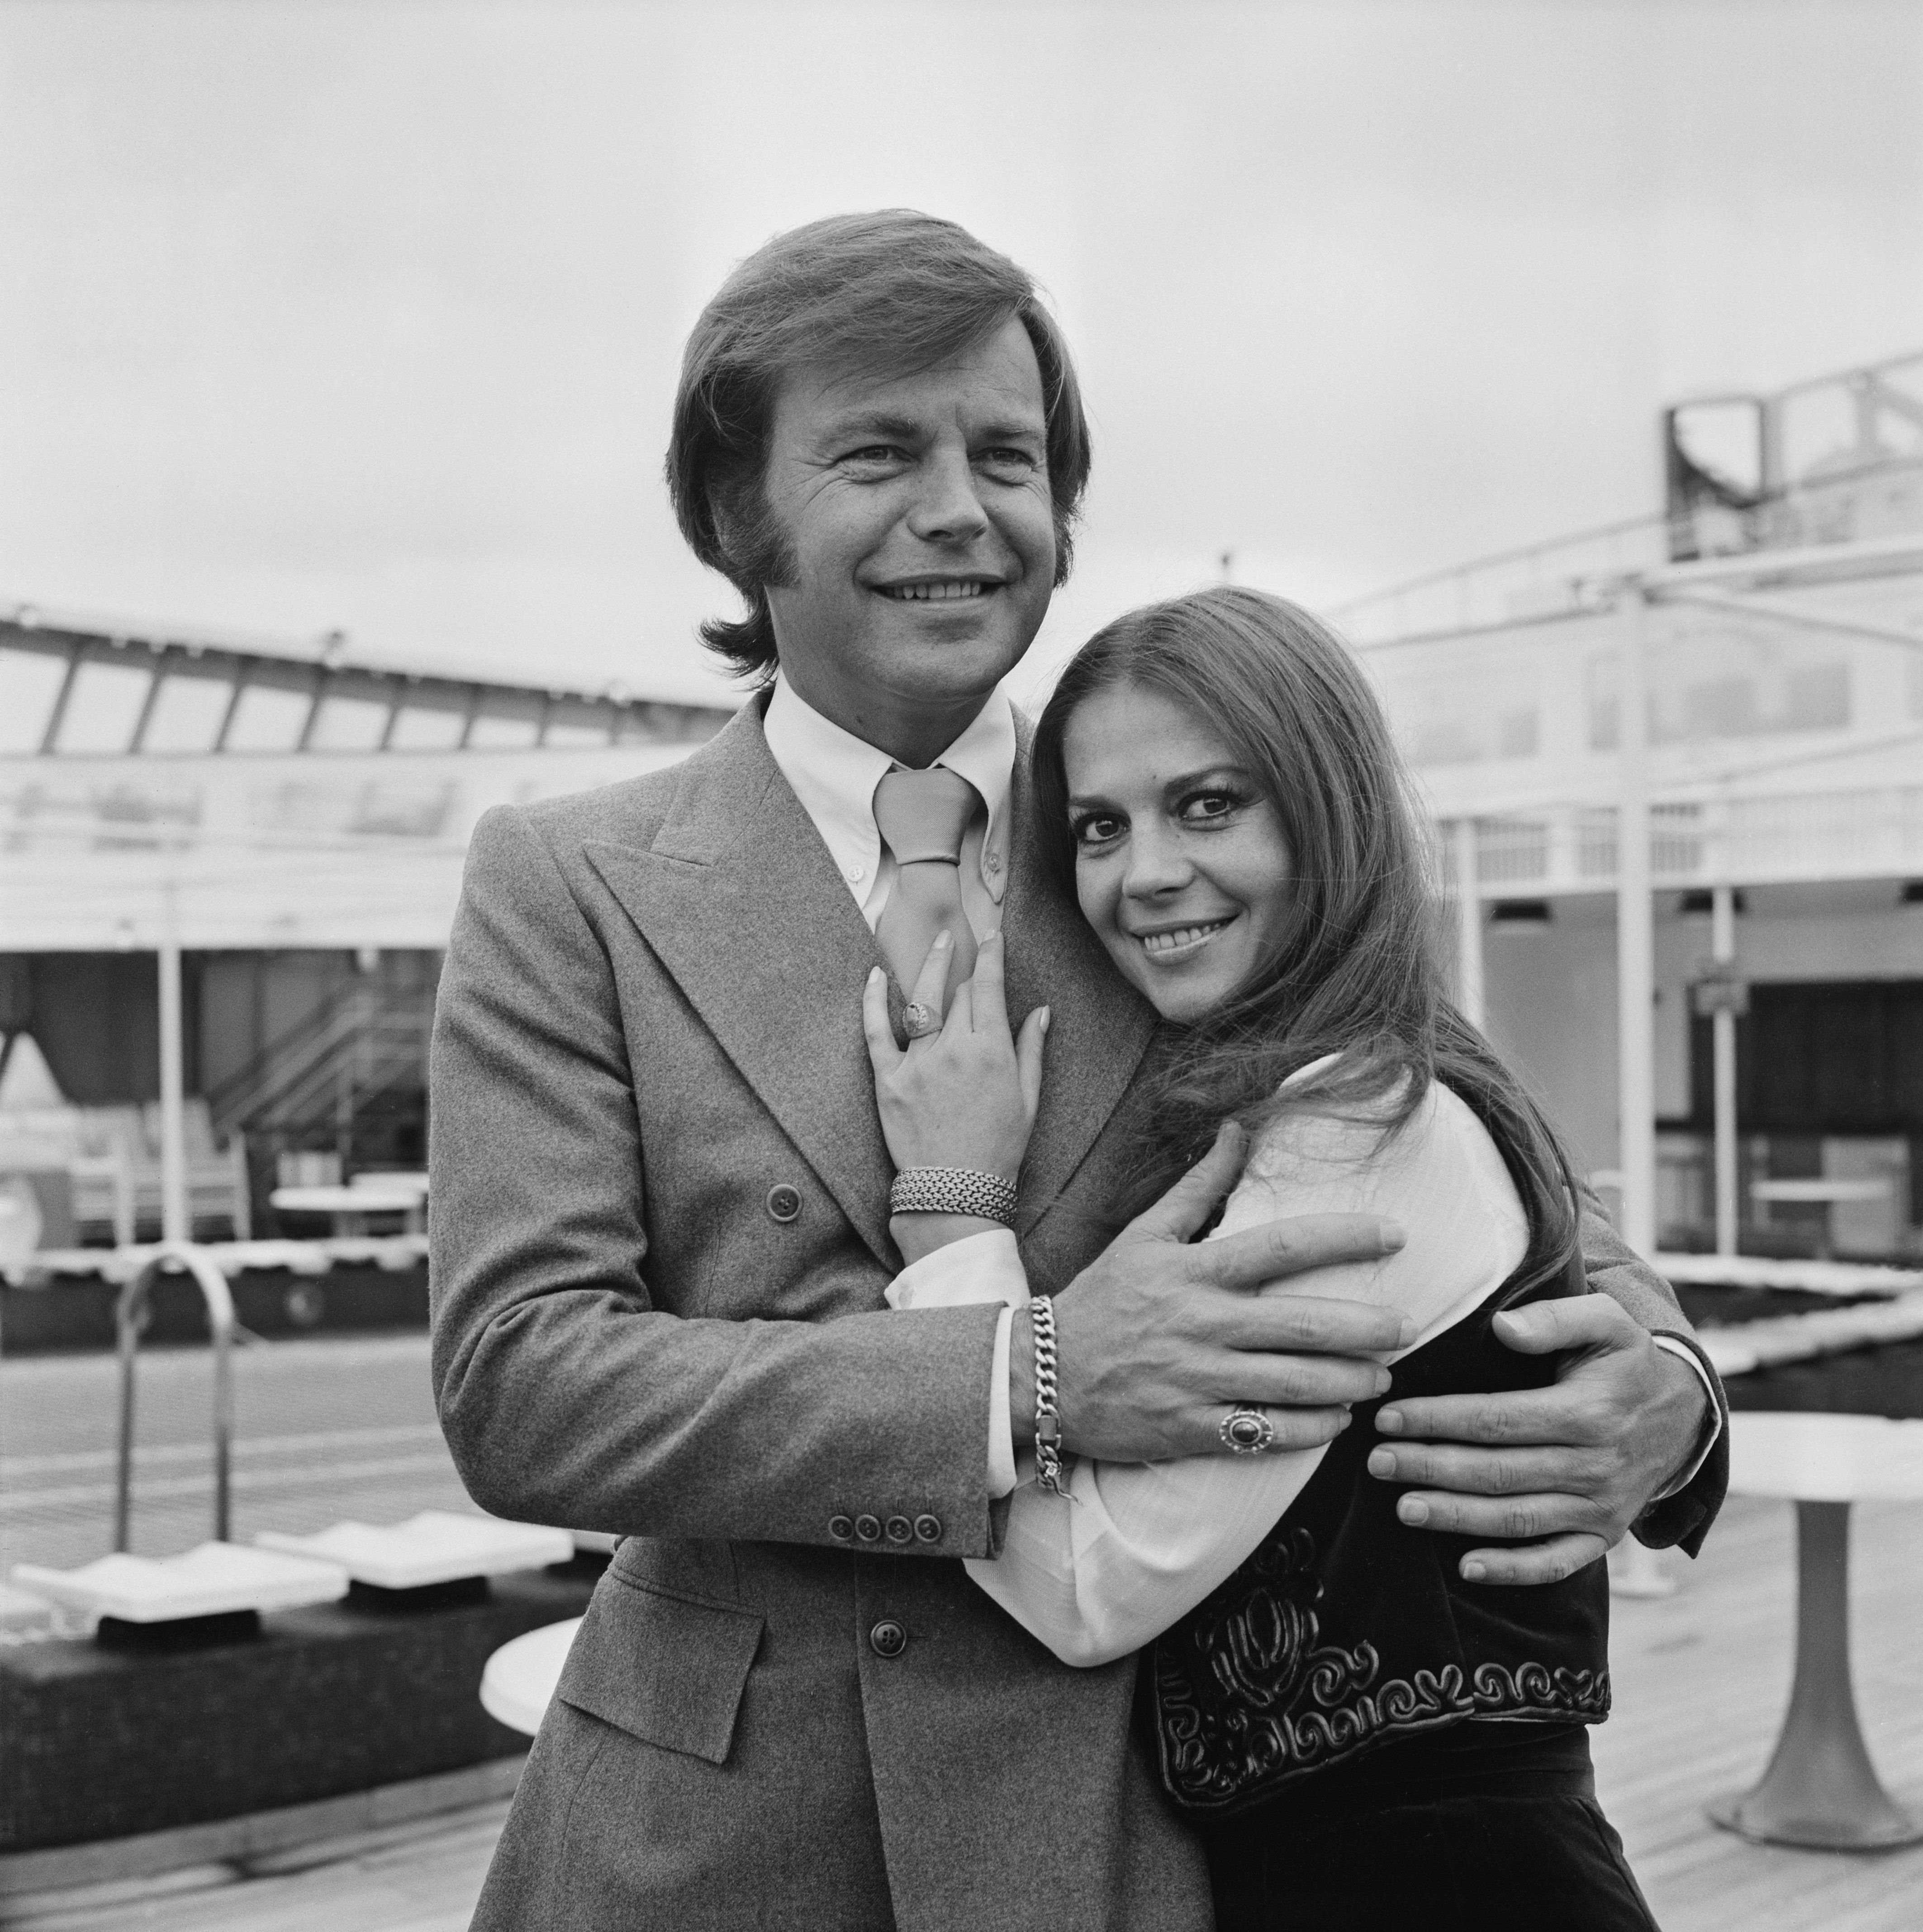 Robert Wagner and Natalie Wood posing together on April 23, 1972. | Source: Getty Images